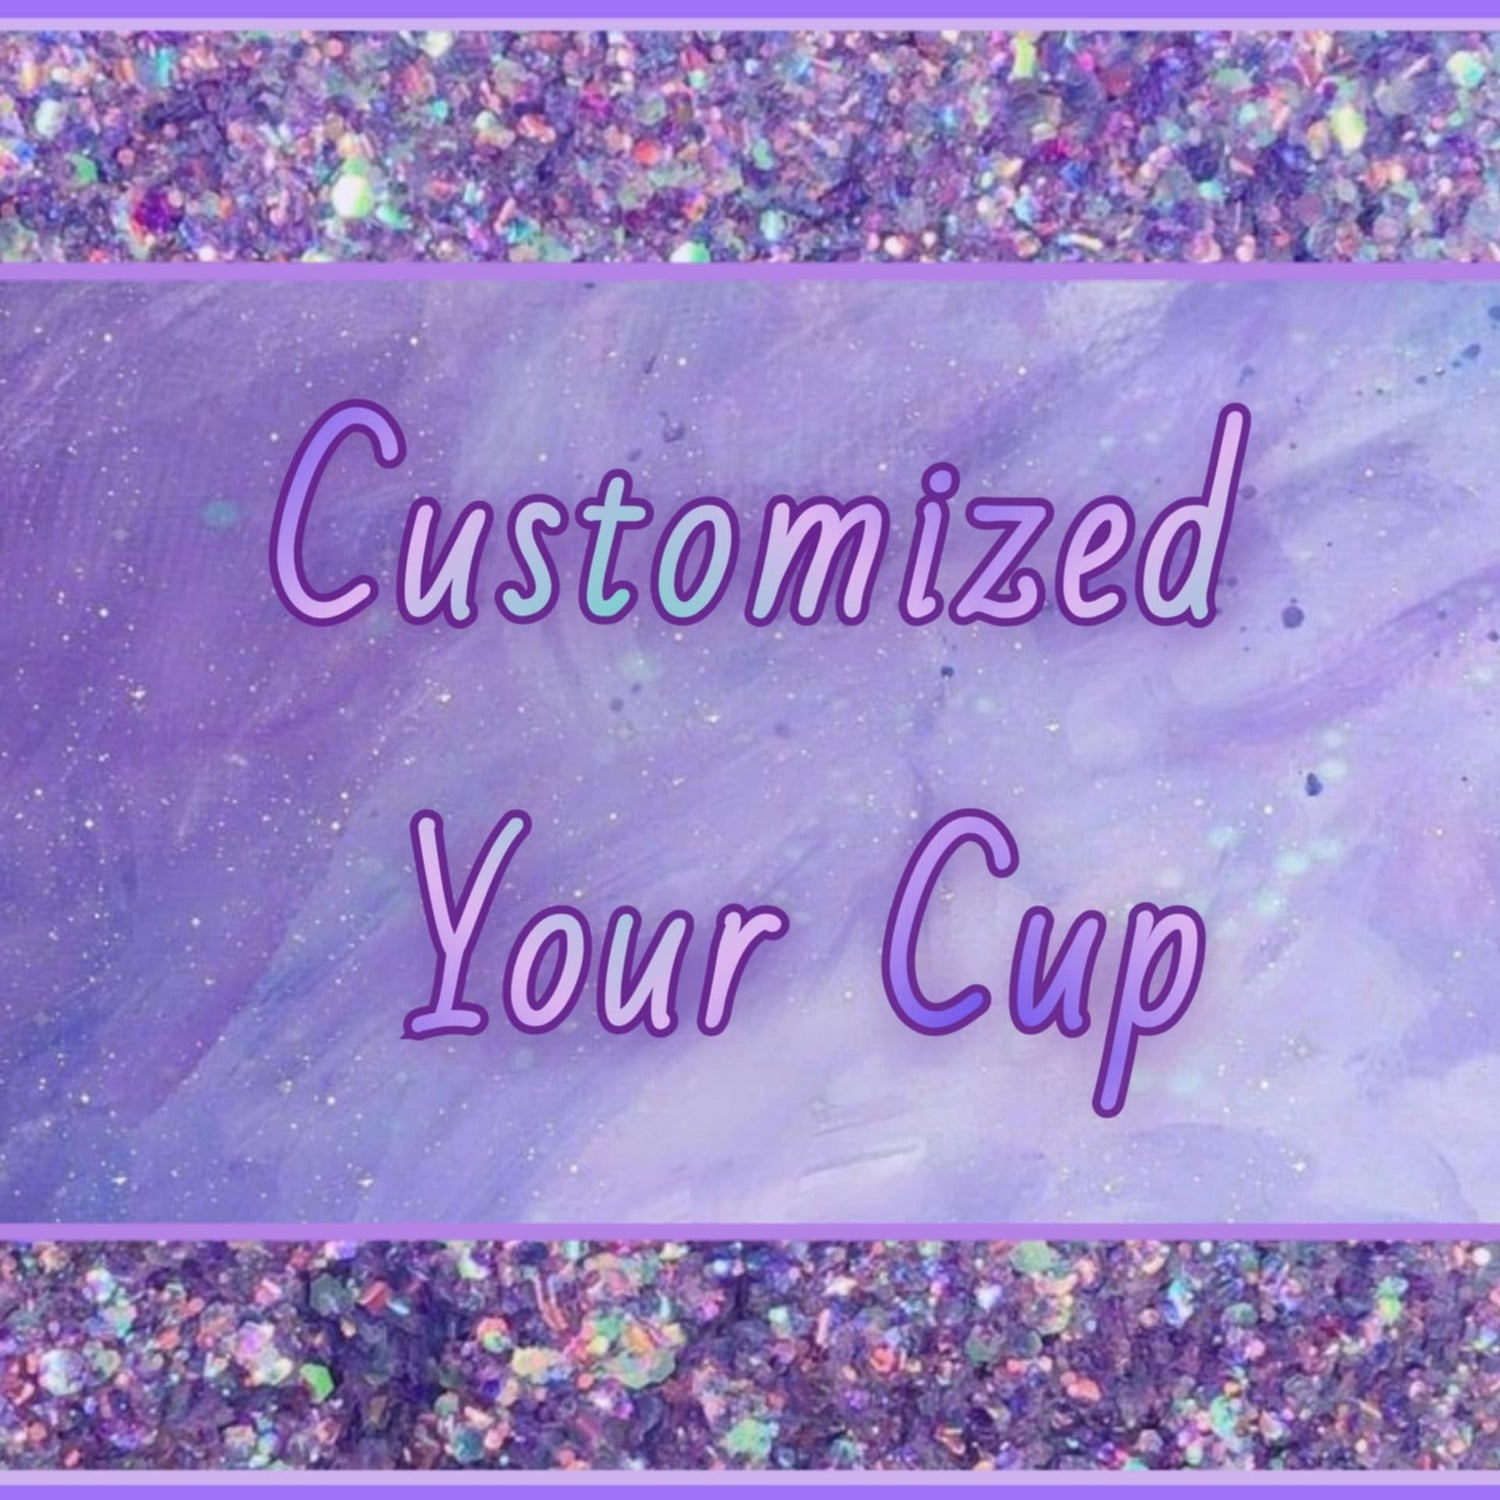 Customize your Cup